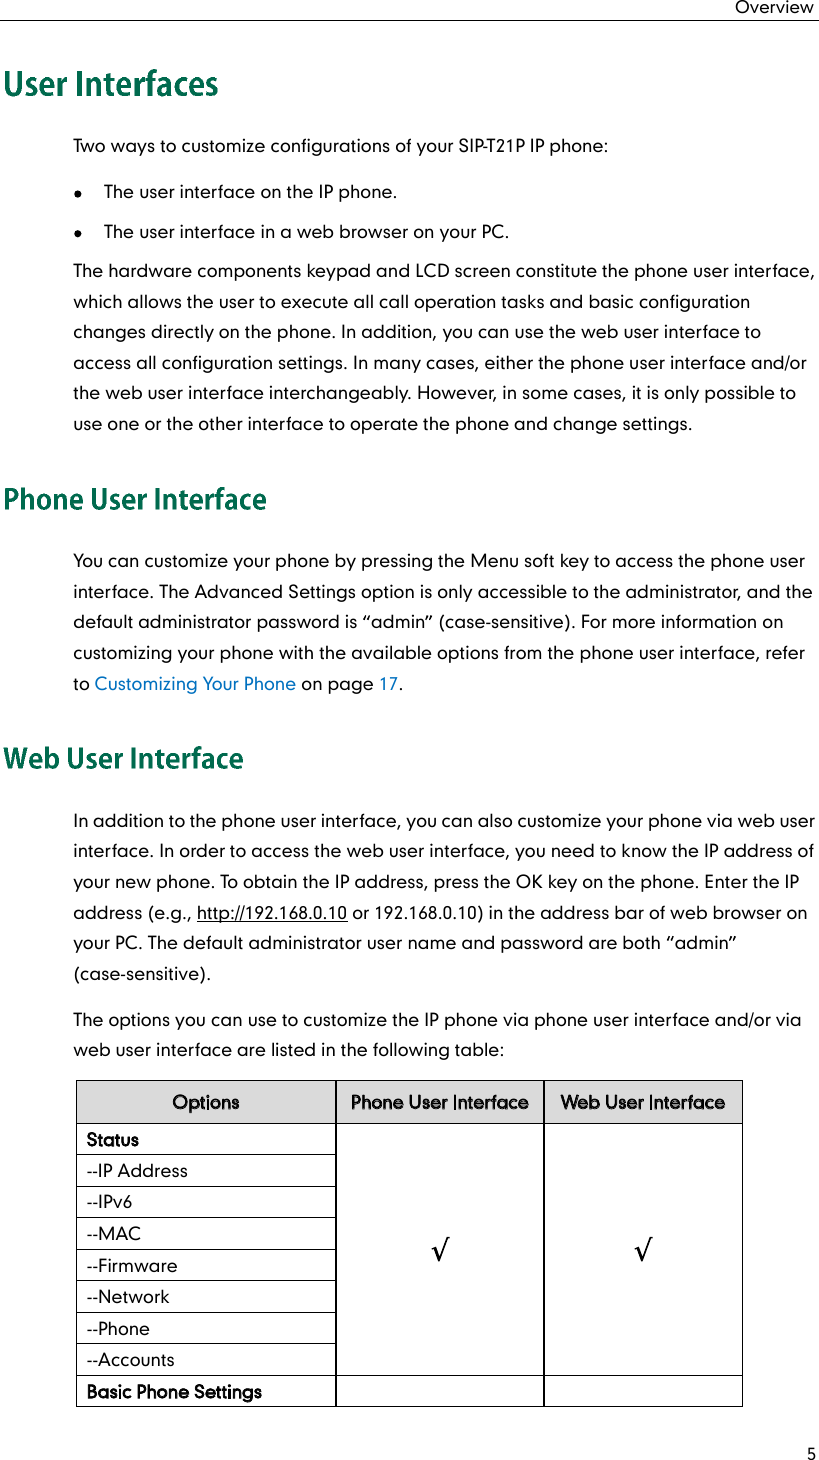 Overview 5 Two ways to customize configurations of your SIP-T21P IP phone:    The user interface on the IP phone.    The user interface in a web browser on your PC. The hardware components keypad and LCD screen constitute the phone user interface, which allows the user to execute all call operation tasks and basic configuration changes directly on the phone. In addition, you can use the web user interface to access all configuration settings. In many cases, either the phone user interface and/or the web user interface interchangeably. However, in some cases, it is only possible to use one or the other interface to operate the phone and change settings. You can customize your phone by pressing the Menu soft key to access the phone user interface. The Advanced Settings option is only accessible to the administrator, and the default administrator password is  admin  (case-sensitive). For more information on customizing your phone with the available options from the phone user interface, refer to Customizing Your Phone on page 17. In addition to the phone user interface, you can also customize your phone via web user interface. In order to access the web user interface, you need to know the IP address of your new phone. To obtain the IP address, press the OK key on the phone. Enter the IP address (e.g., http://192.168.0.10 or 192.168.0.10) in the address bar of web browser on your PC. The default administrator user name and password are both  admin  (case-sensitive). The options you can use to customize the IP phone via phone user interface and/or via web user interface are listed in the following table: Options  Phone User Interface  Web User Interface Status    --IP Address --IPv6 --MAC --Firmware --Network --Phone --Accounts Basic Phone Settings     